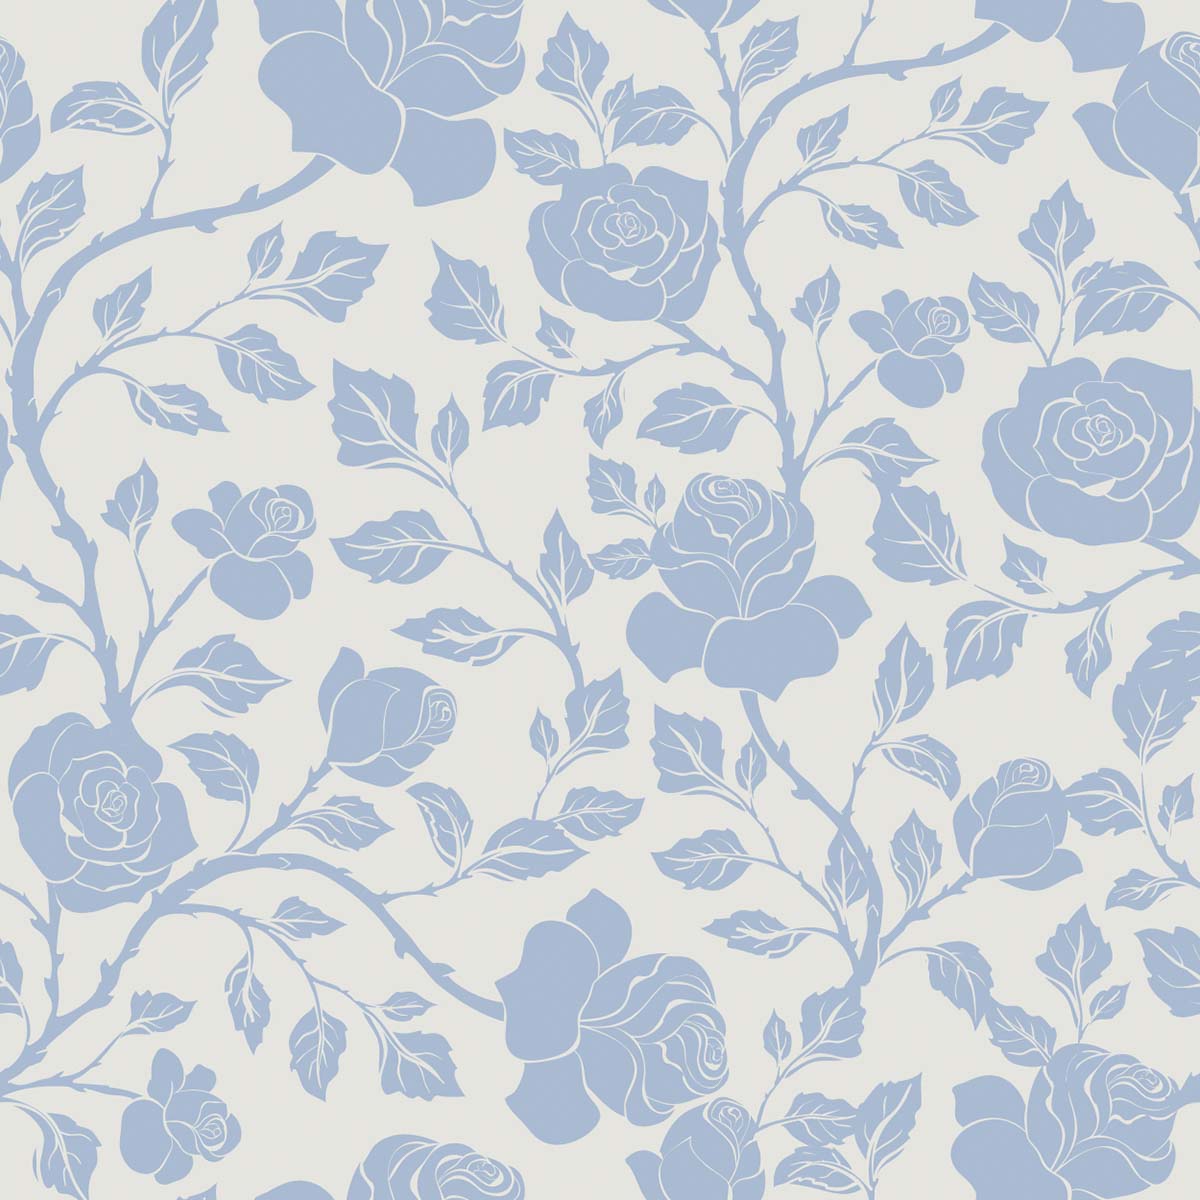 A pattern of blue flowers and leaves